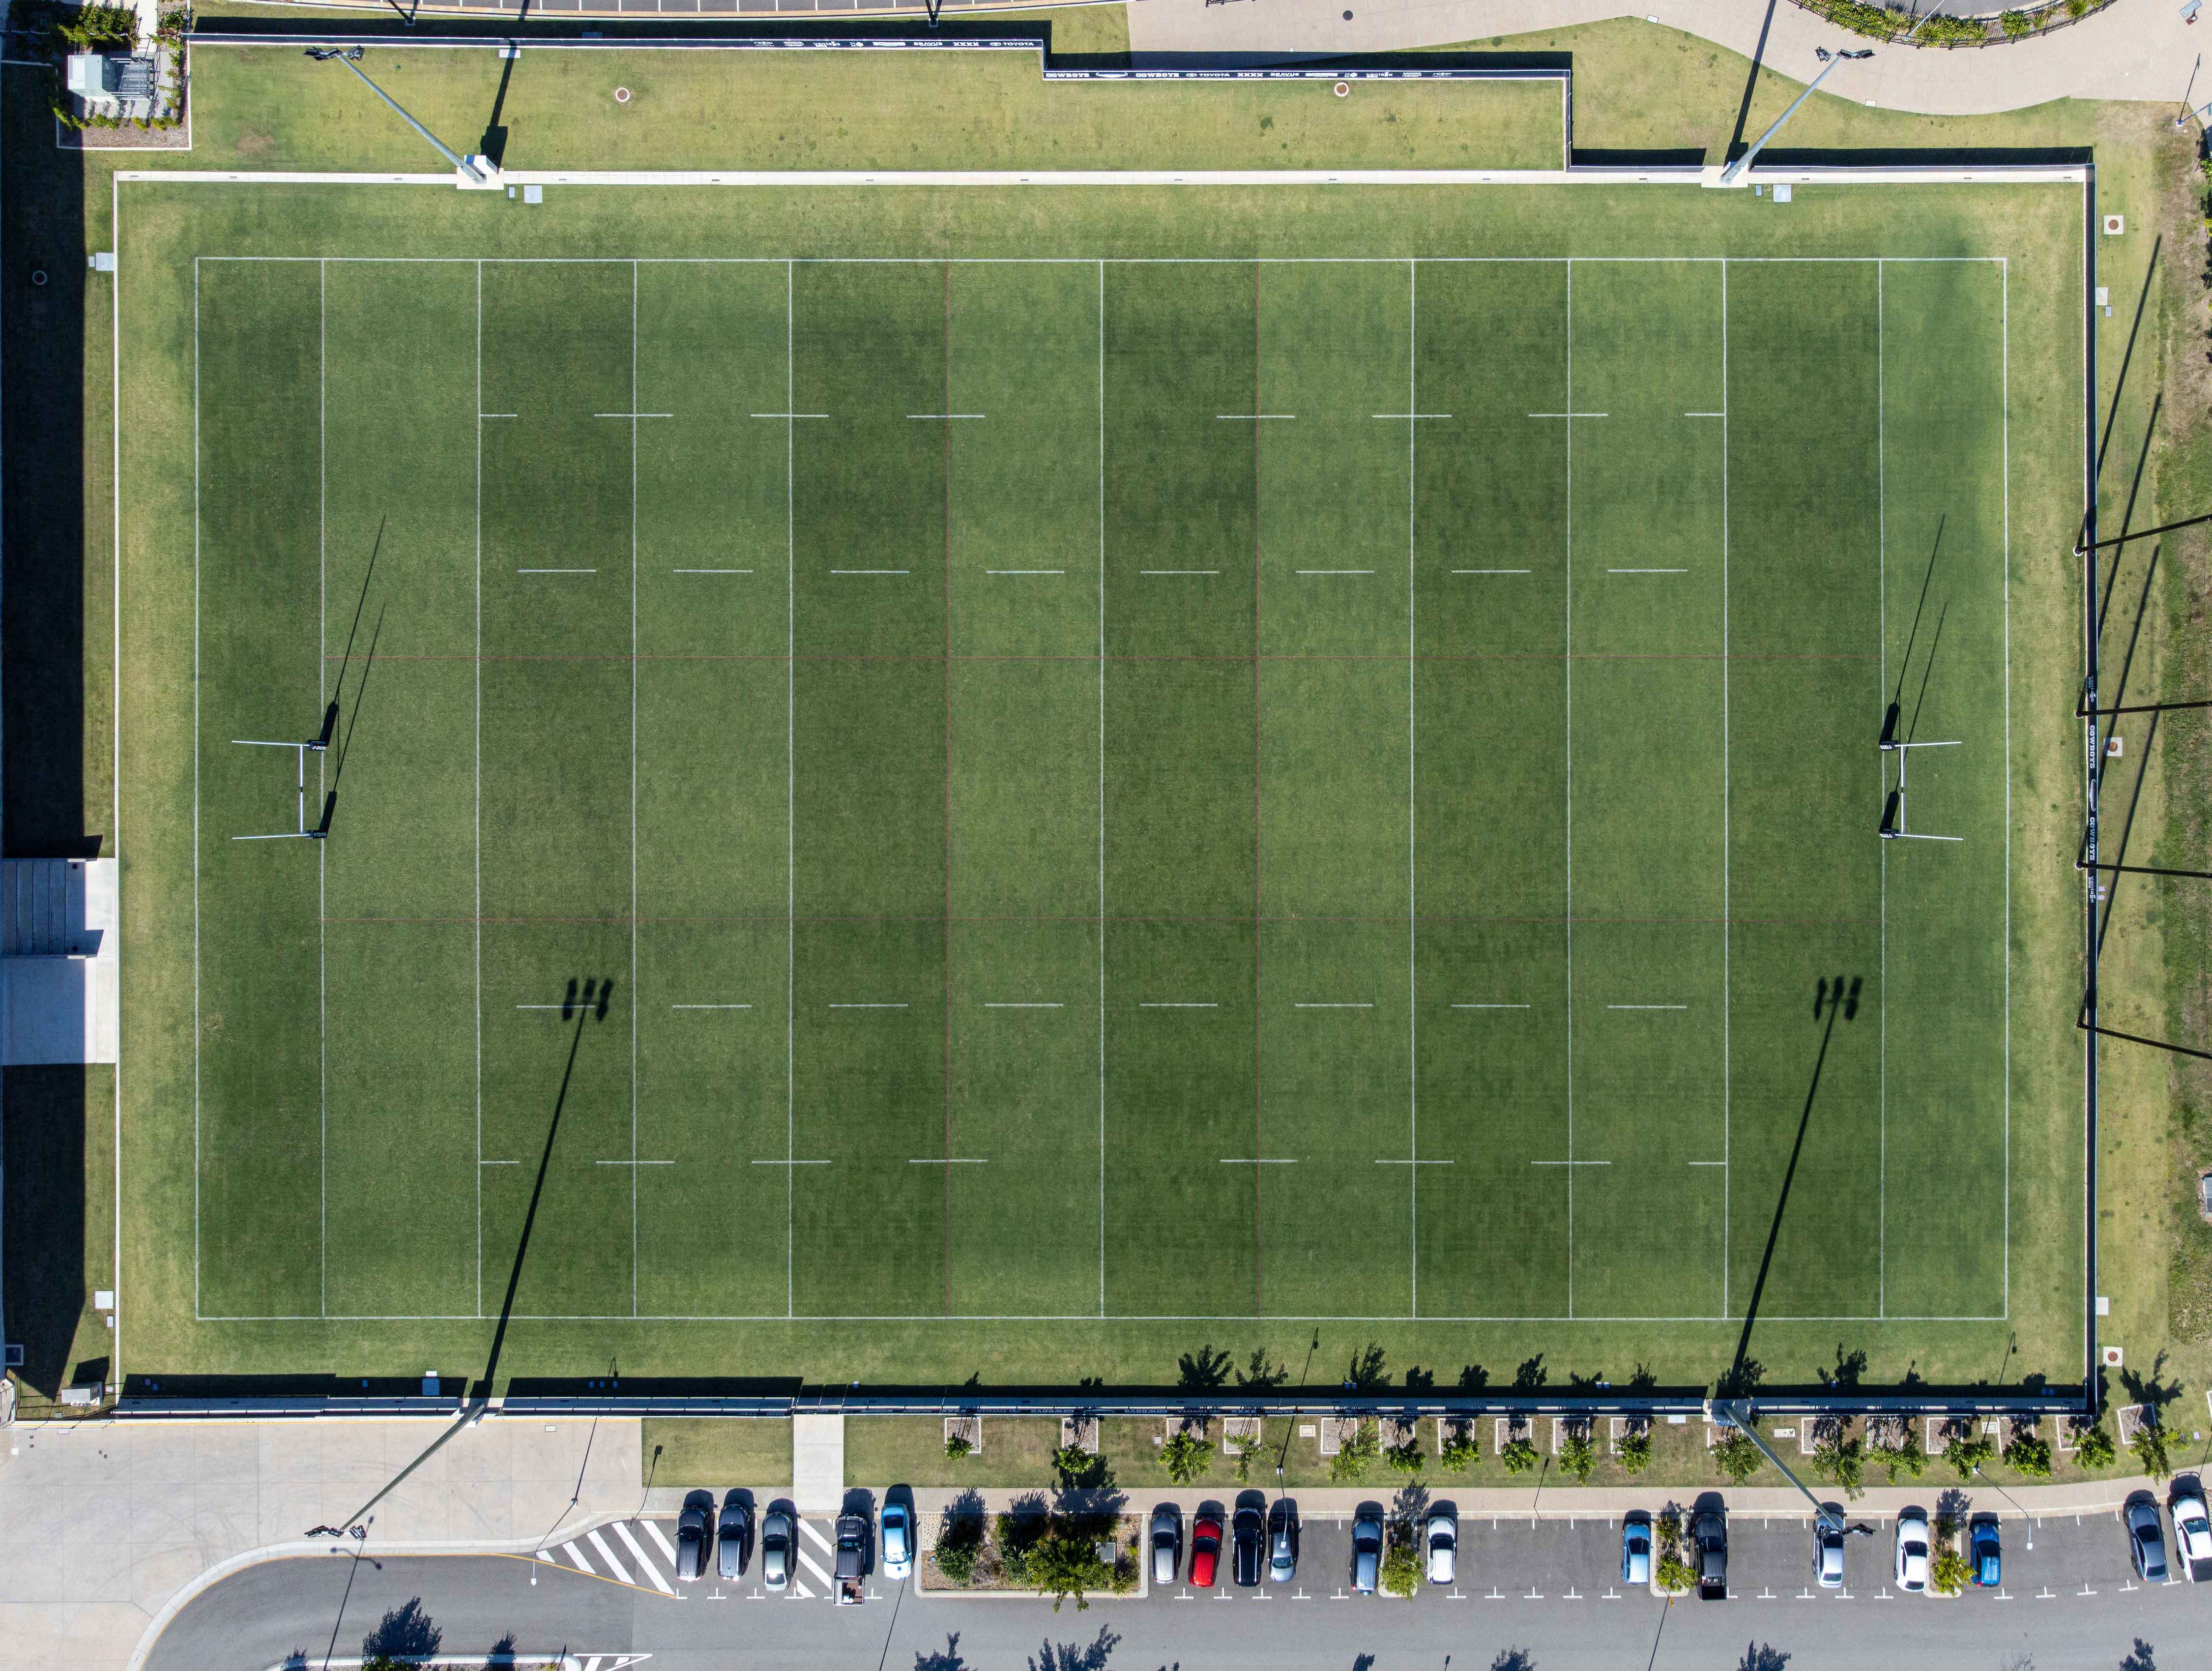 Aerial view of an outdoor natural turf rugby Field of Play